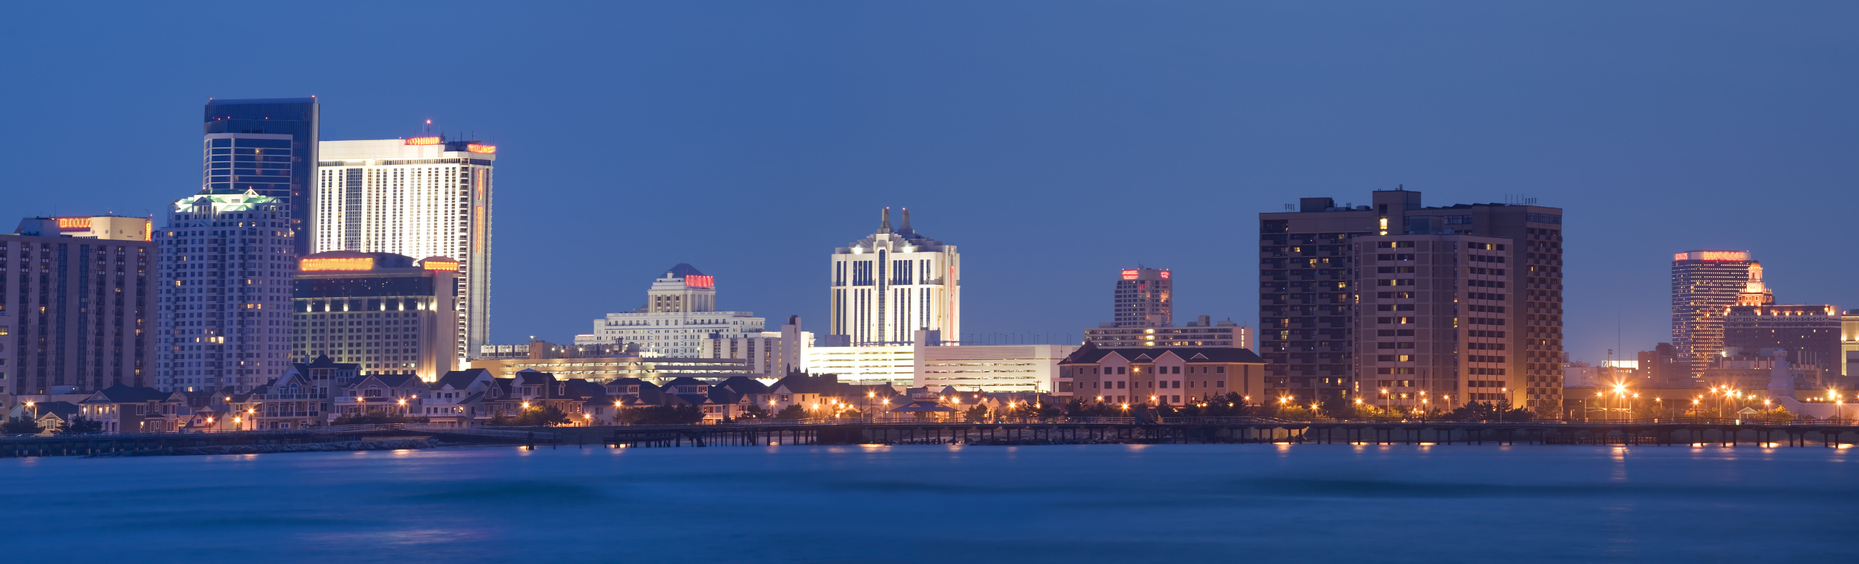 "Panorama of the cityscape of Atlantic City,NJ in evening light. 2 image merge. Soft water of the inlet due to slow shutter.Lighted casino names and logos are blurred but not removed."